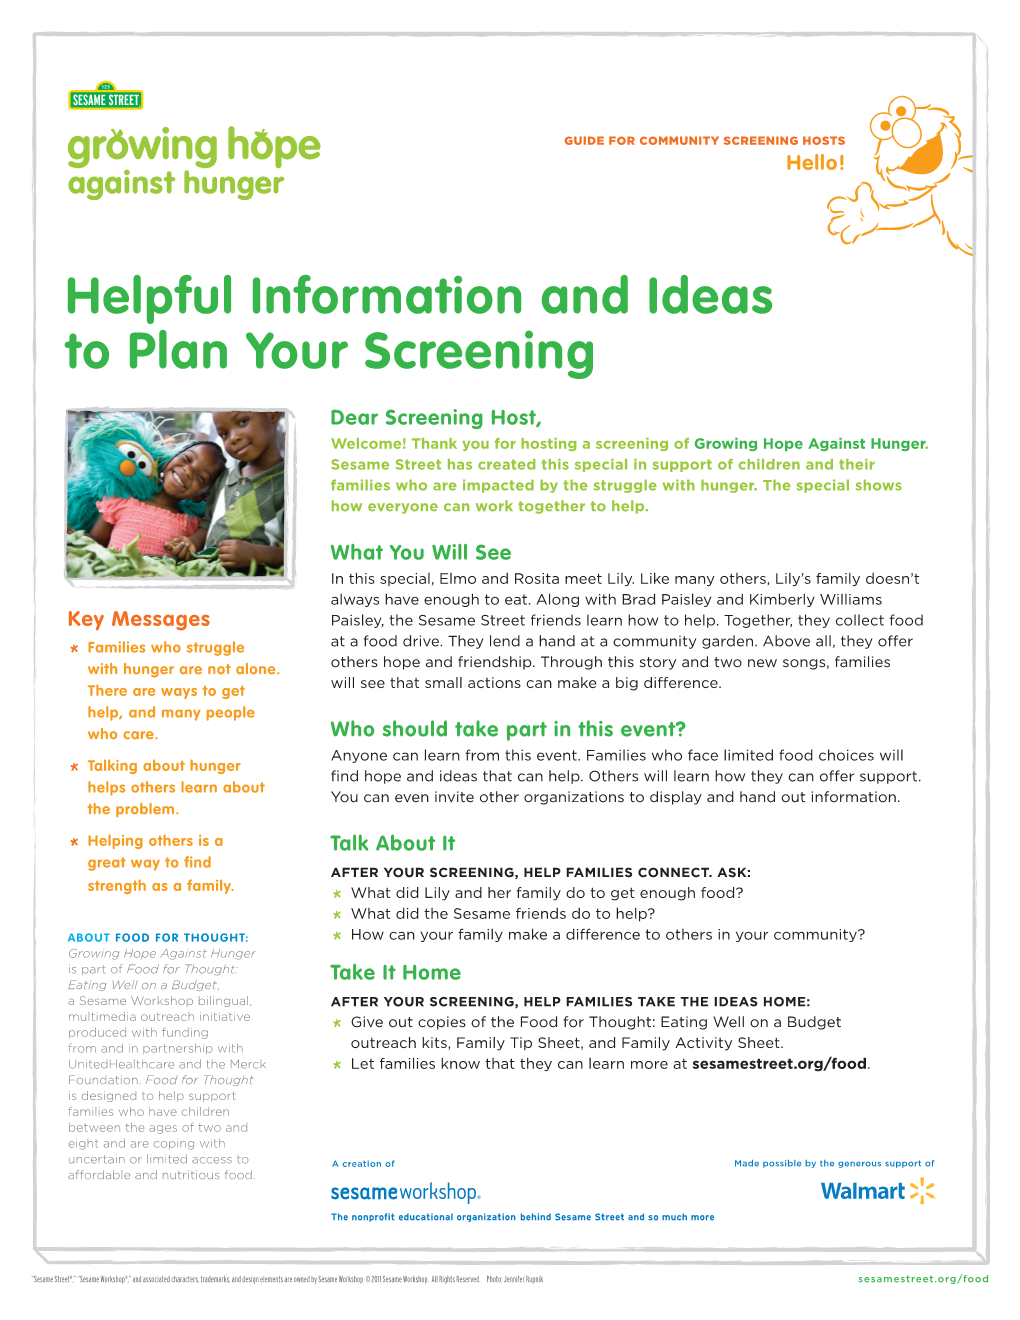 Helpful Information and Ideas to Plan Your Screening